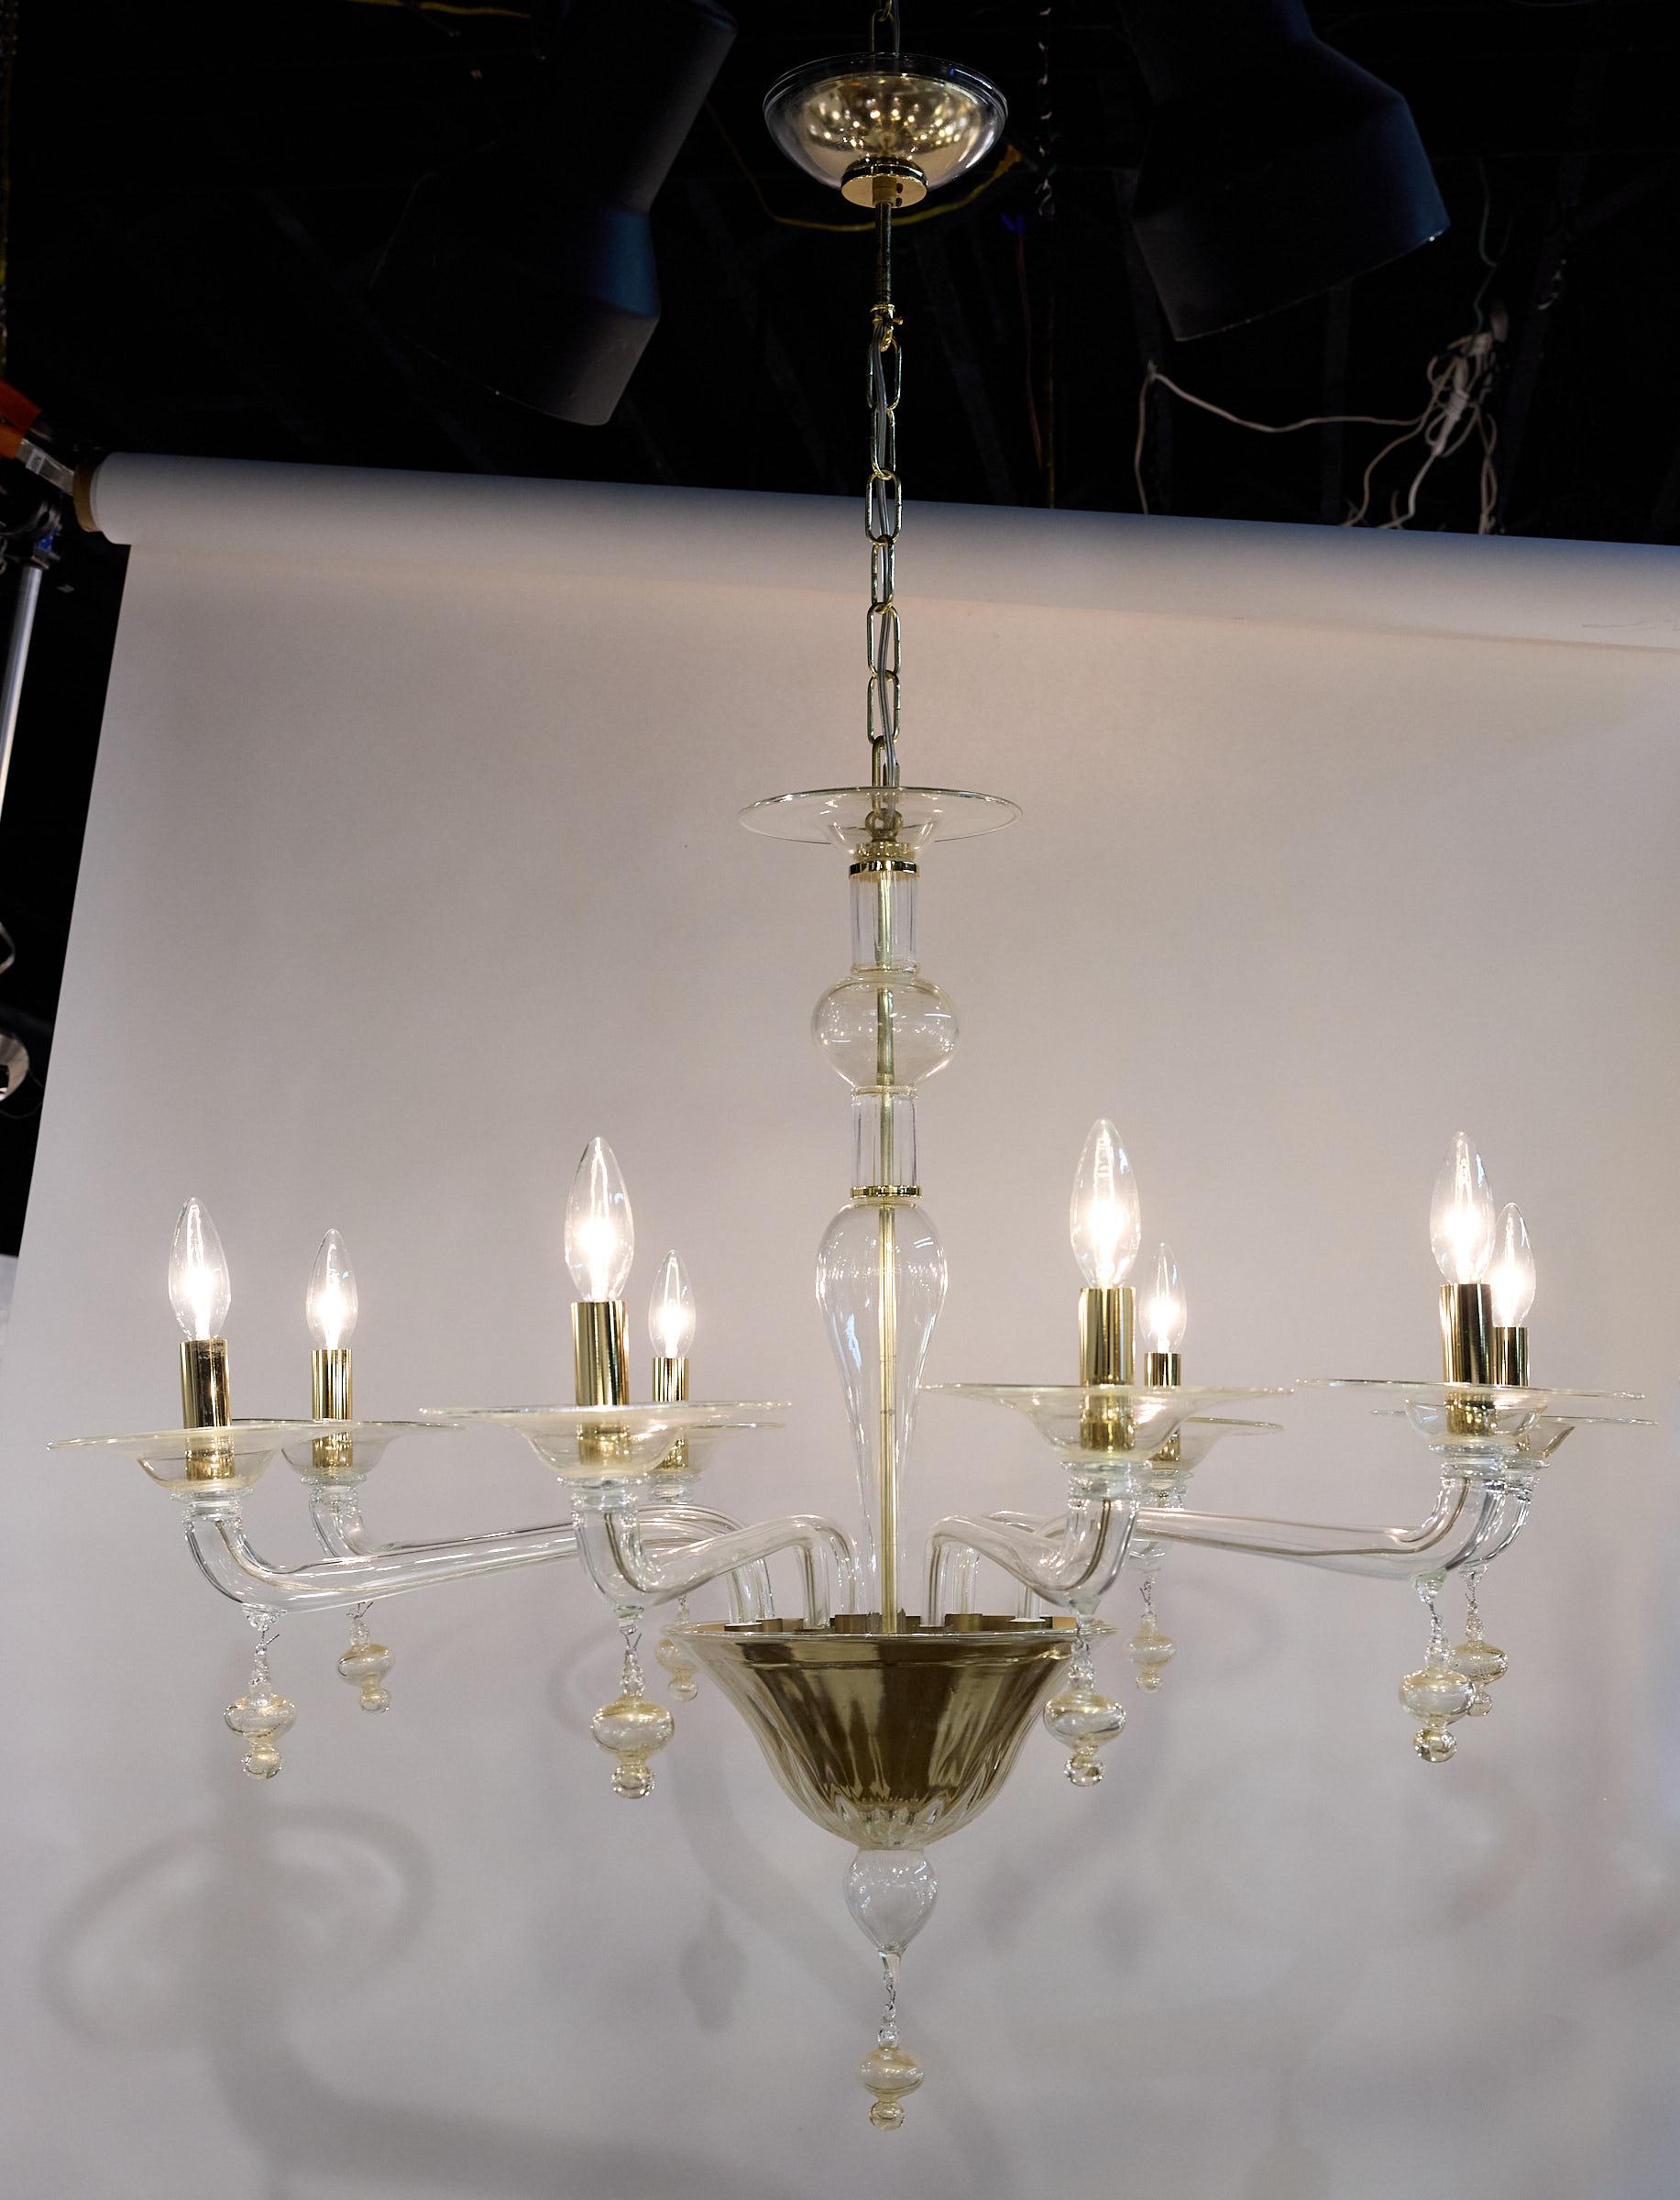 Sleek and elegant 20th Century Murano glass chandelier having eight arms supporting brass candleabras. The fixture is made of clear glass, gold specked glass, and brass accents. 

A matching canopy and gold chain are included and measure an